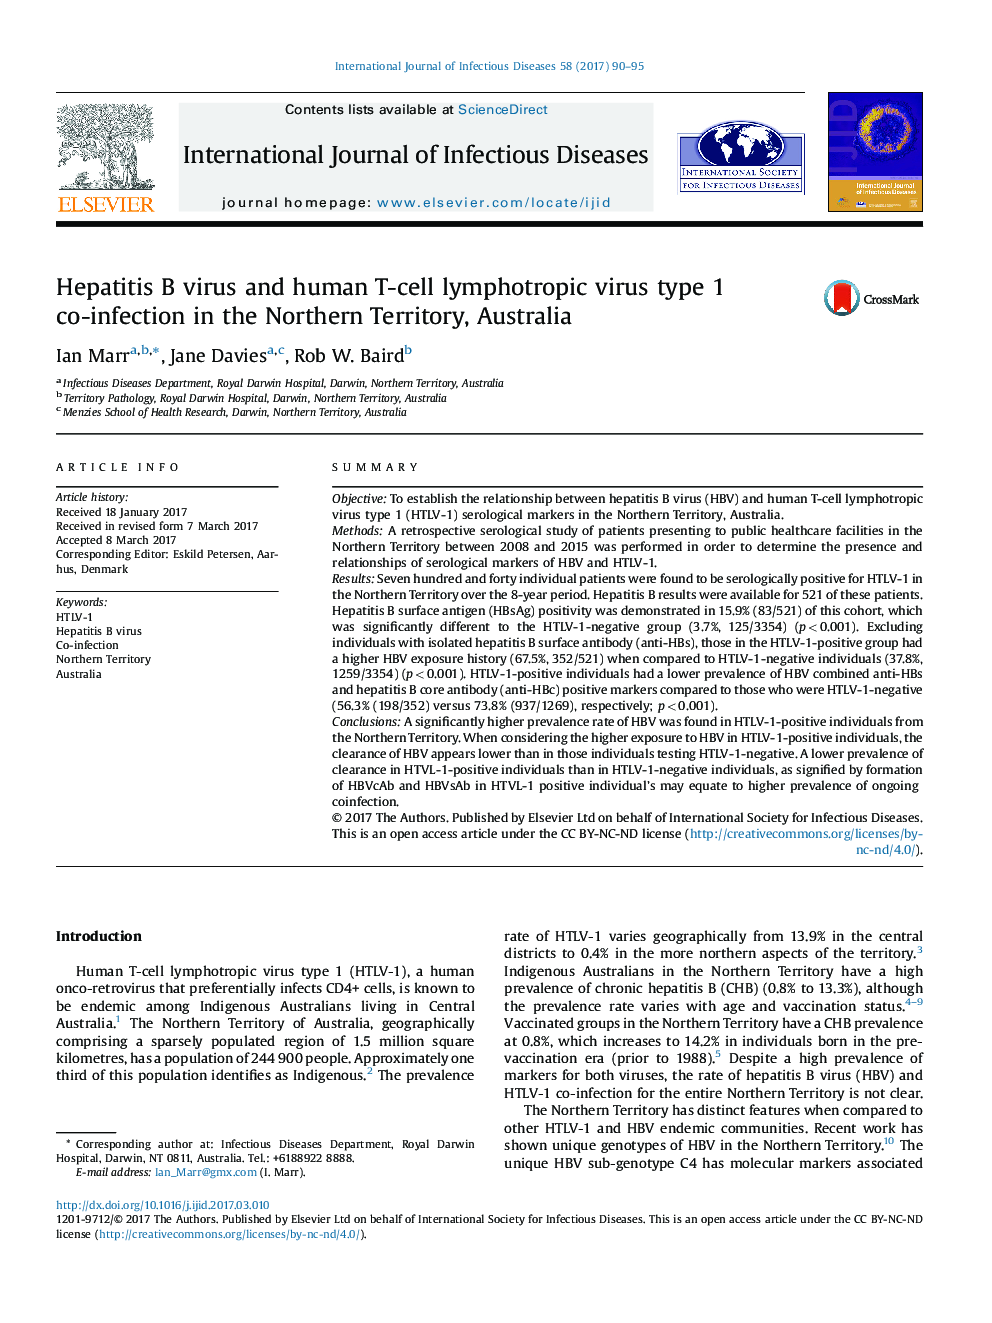 Hepatitis B virus and human T-cell lymphotropic virus type 1 co-infection in the Northern Territory, Australia